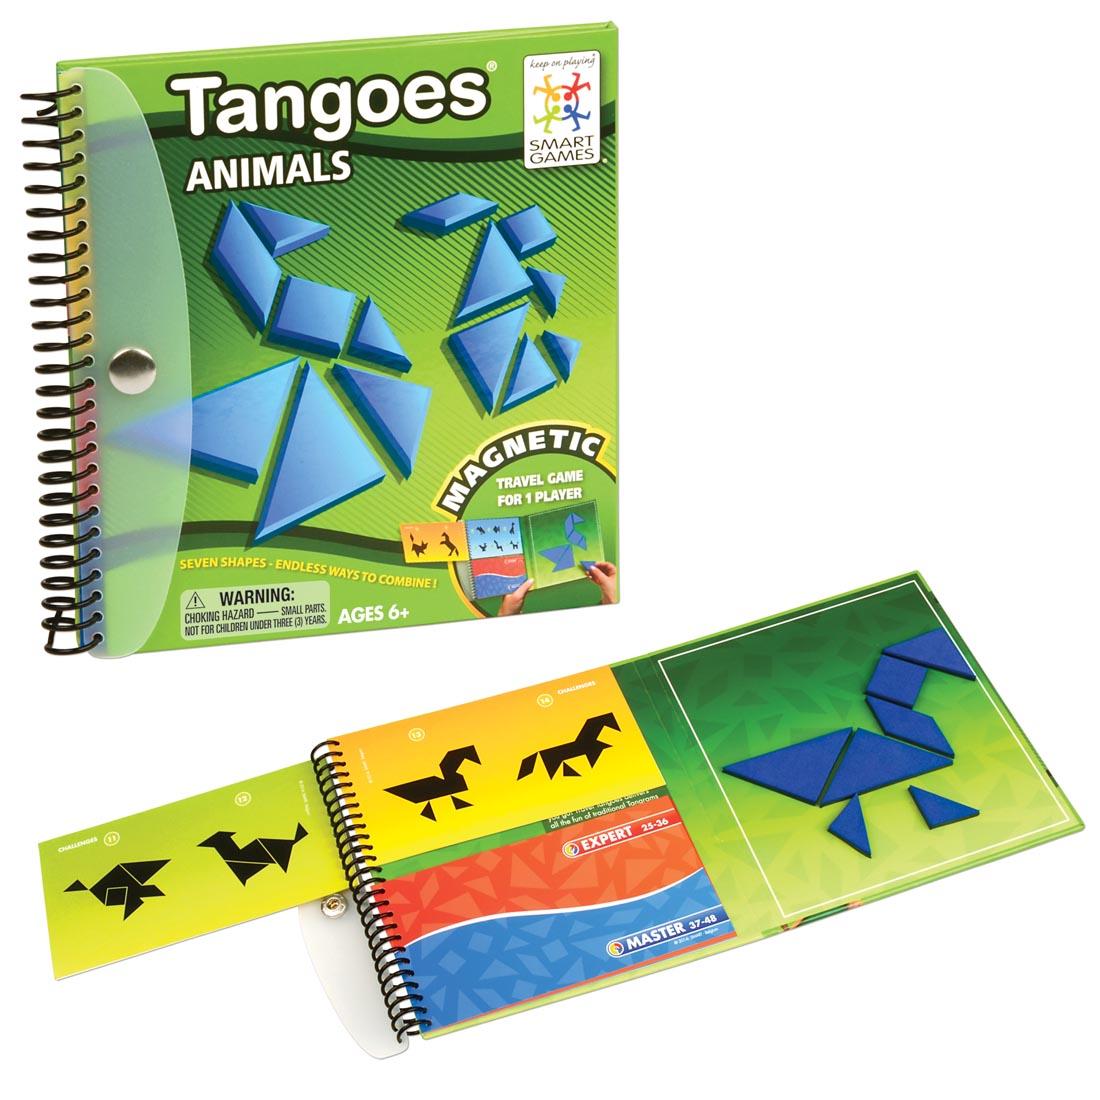 Tangoes Animals Magnetic Travel Game by Smart Games